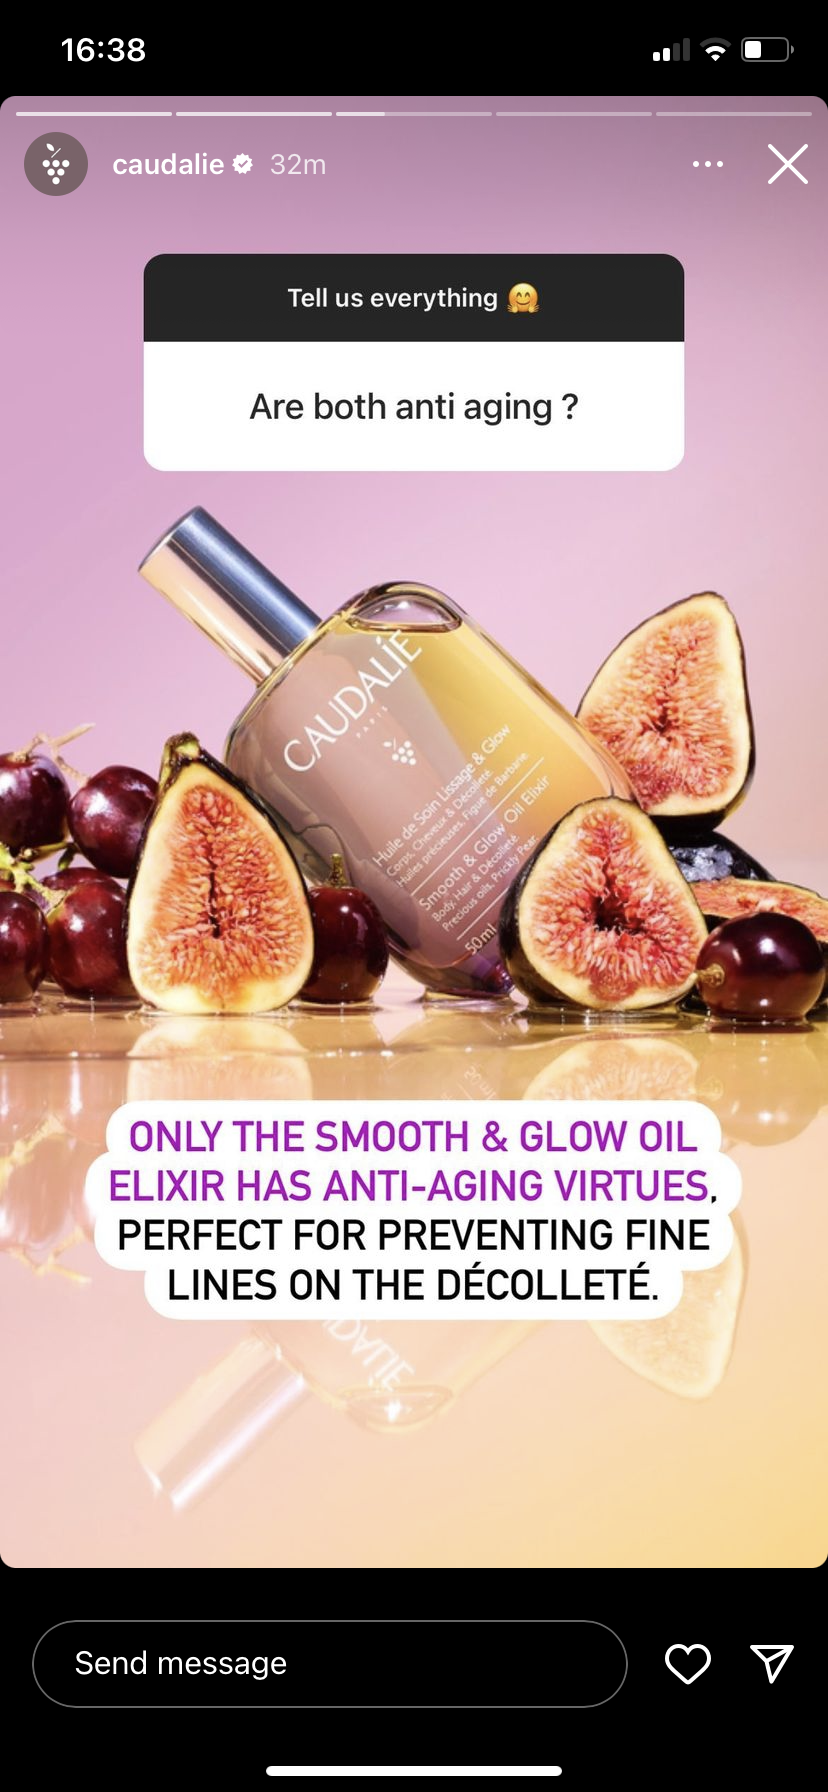 Smooth & Glow Fig Oil Elixir 100ml - Caudile *New Product*